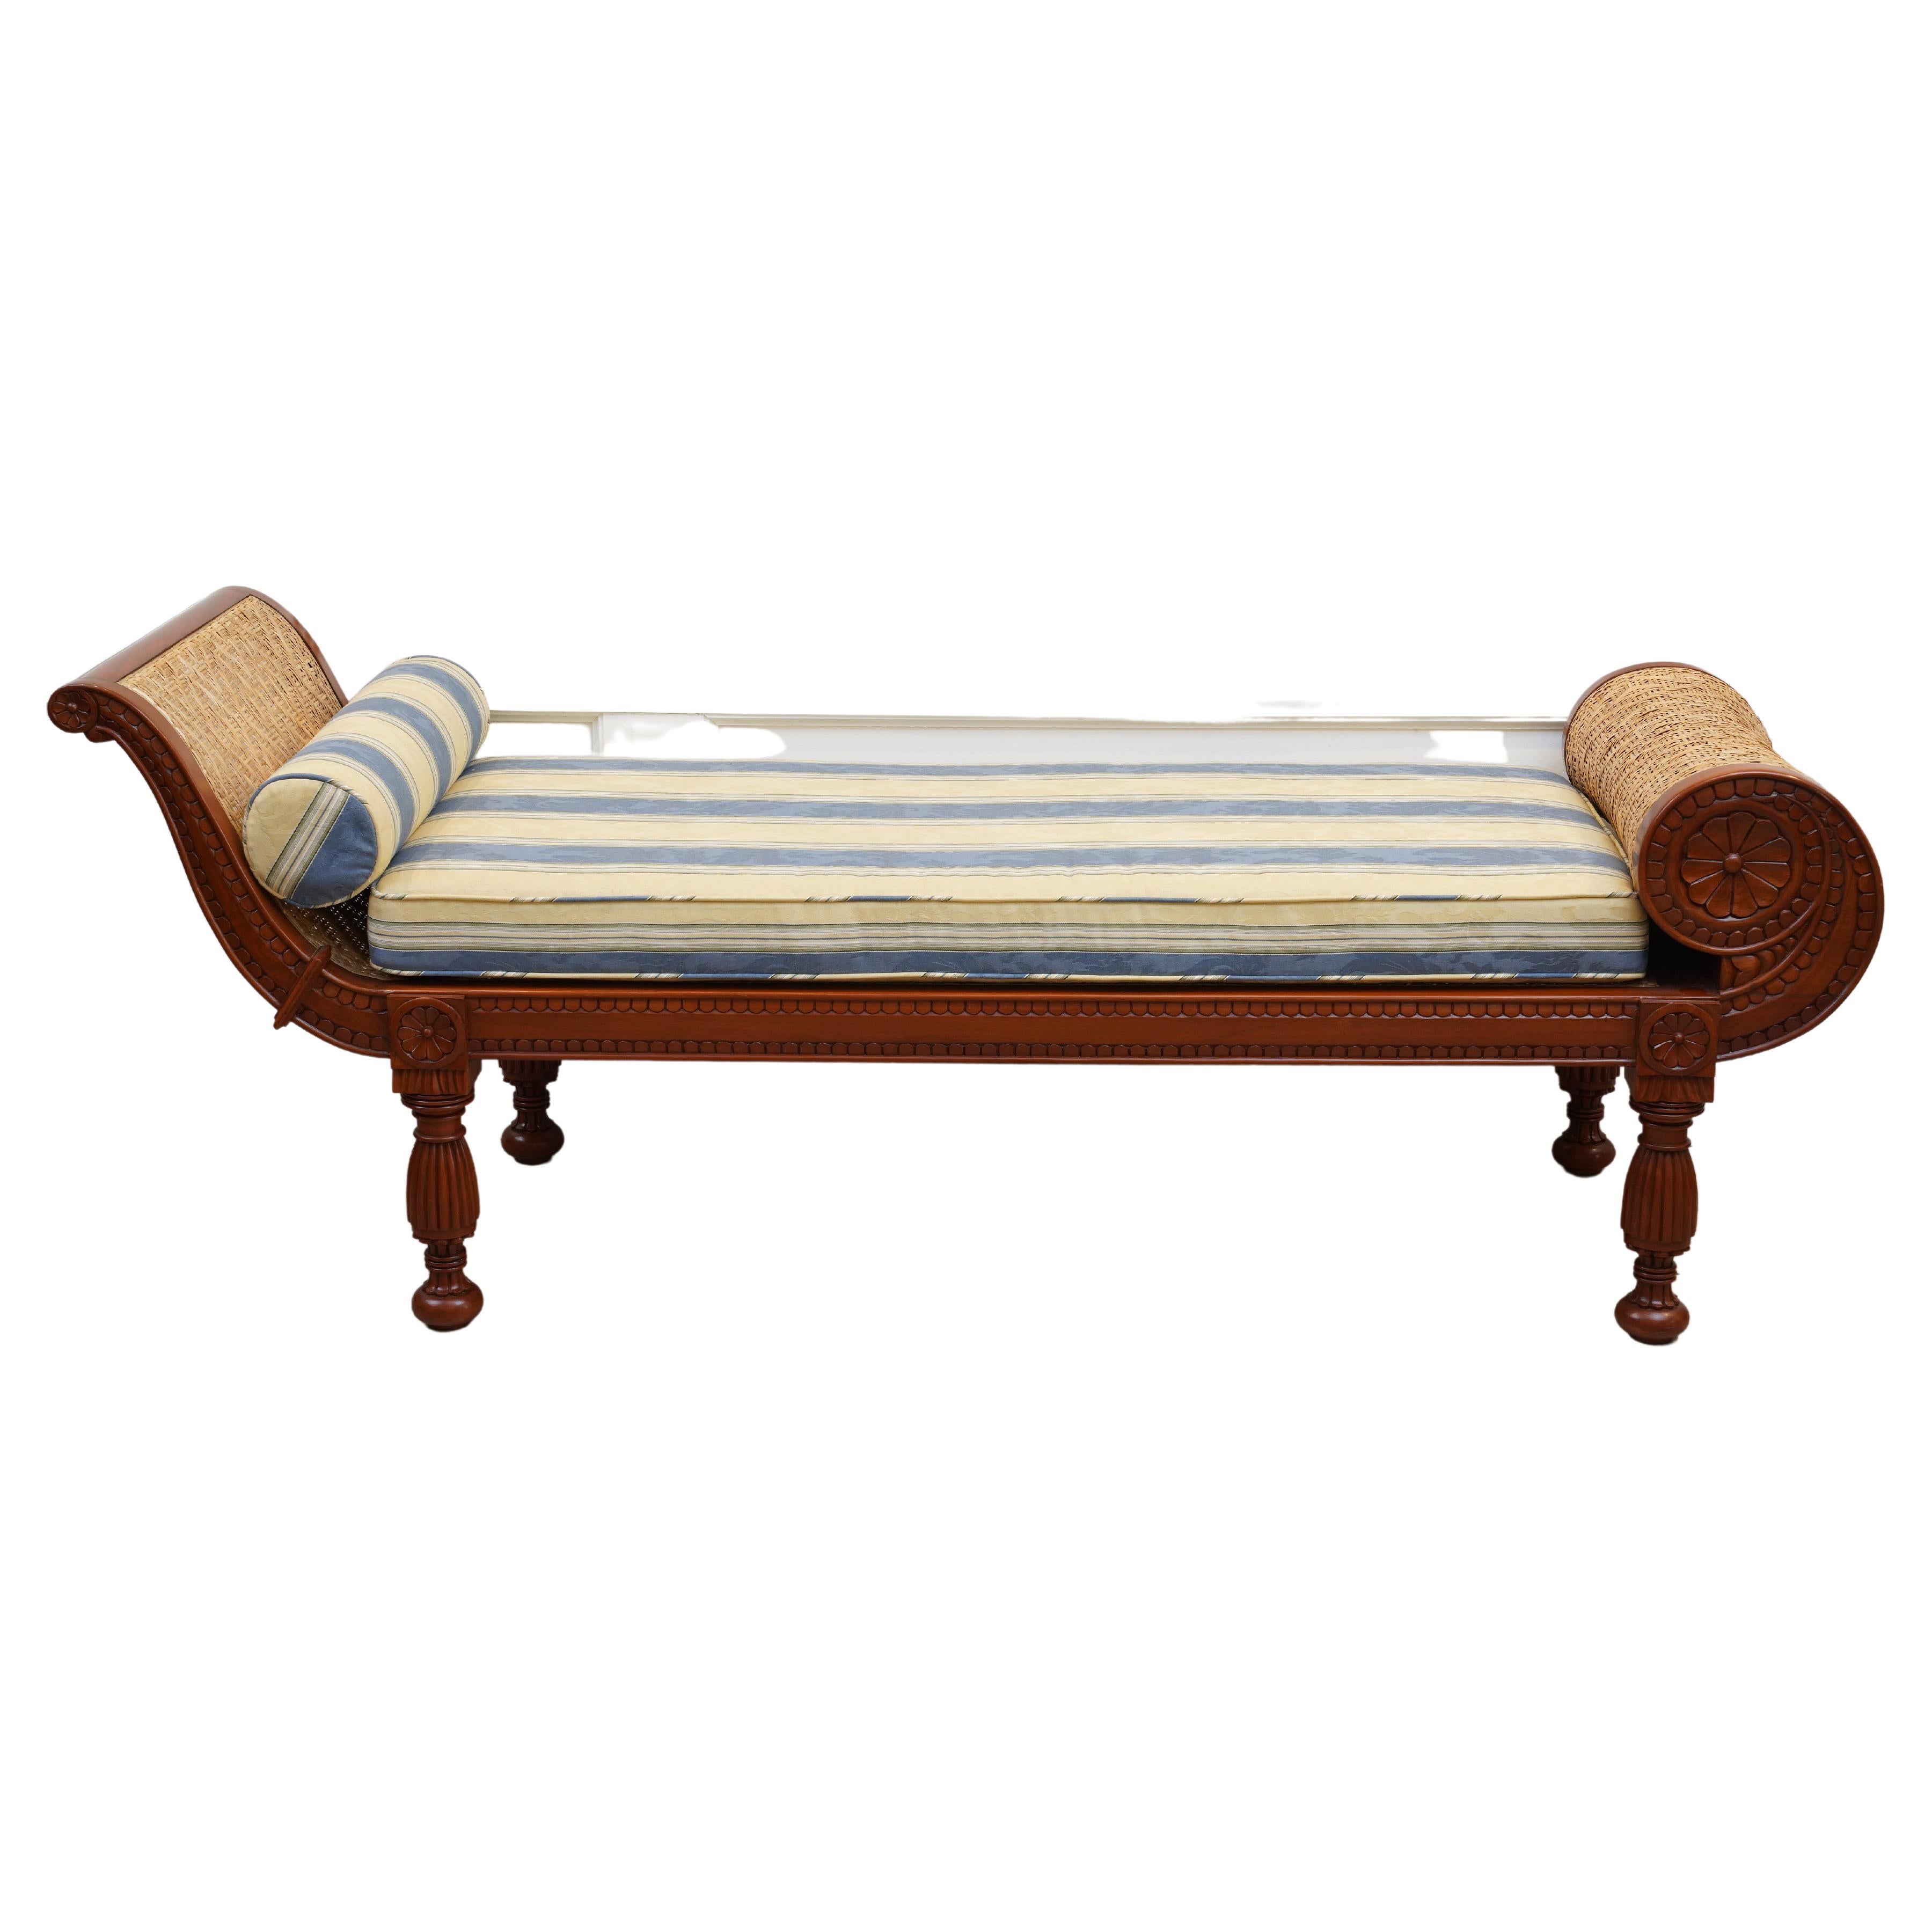 A mahogany and caned recamier or daybed with carving on both sides, a caned rolled end, and reeded legs. The caning is newly done and in a very tight woven pattern without holes, making it stronger than the usual open hole caning. The foam cushion